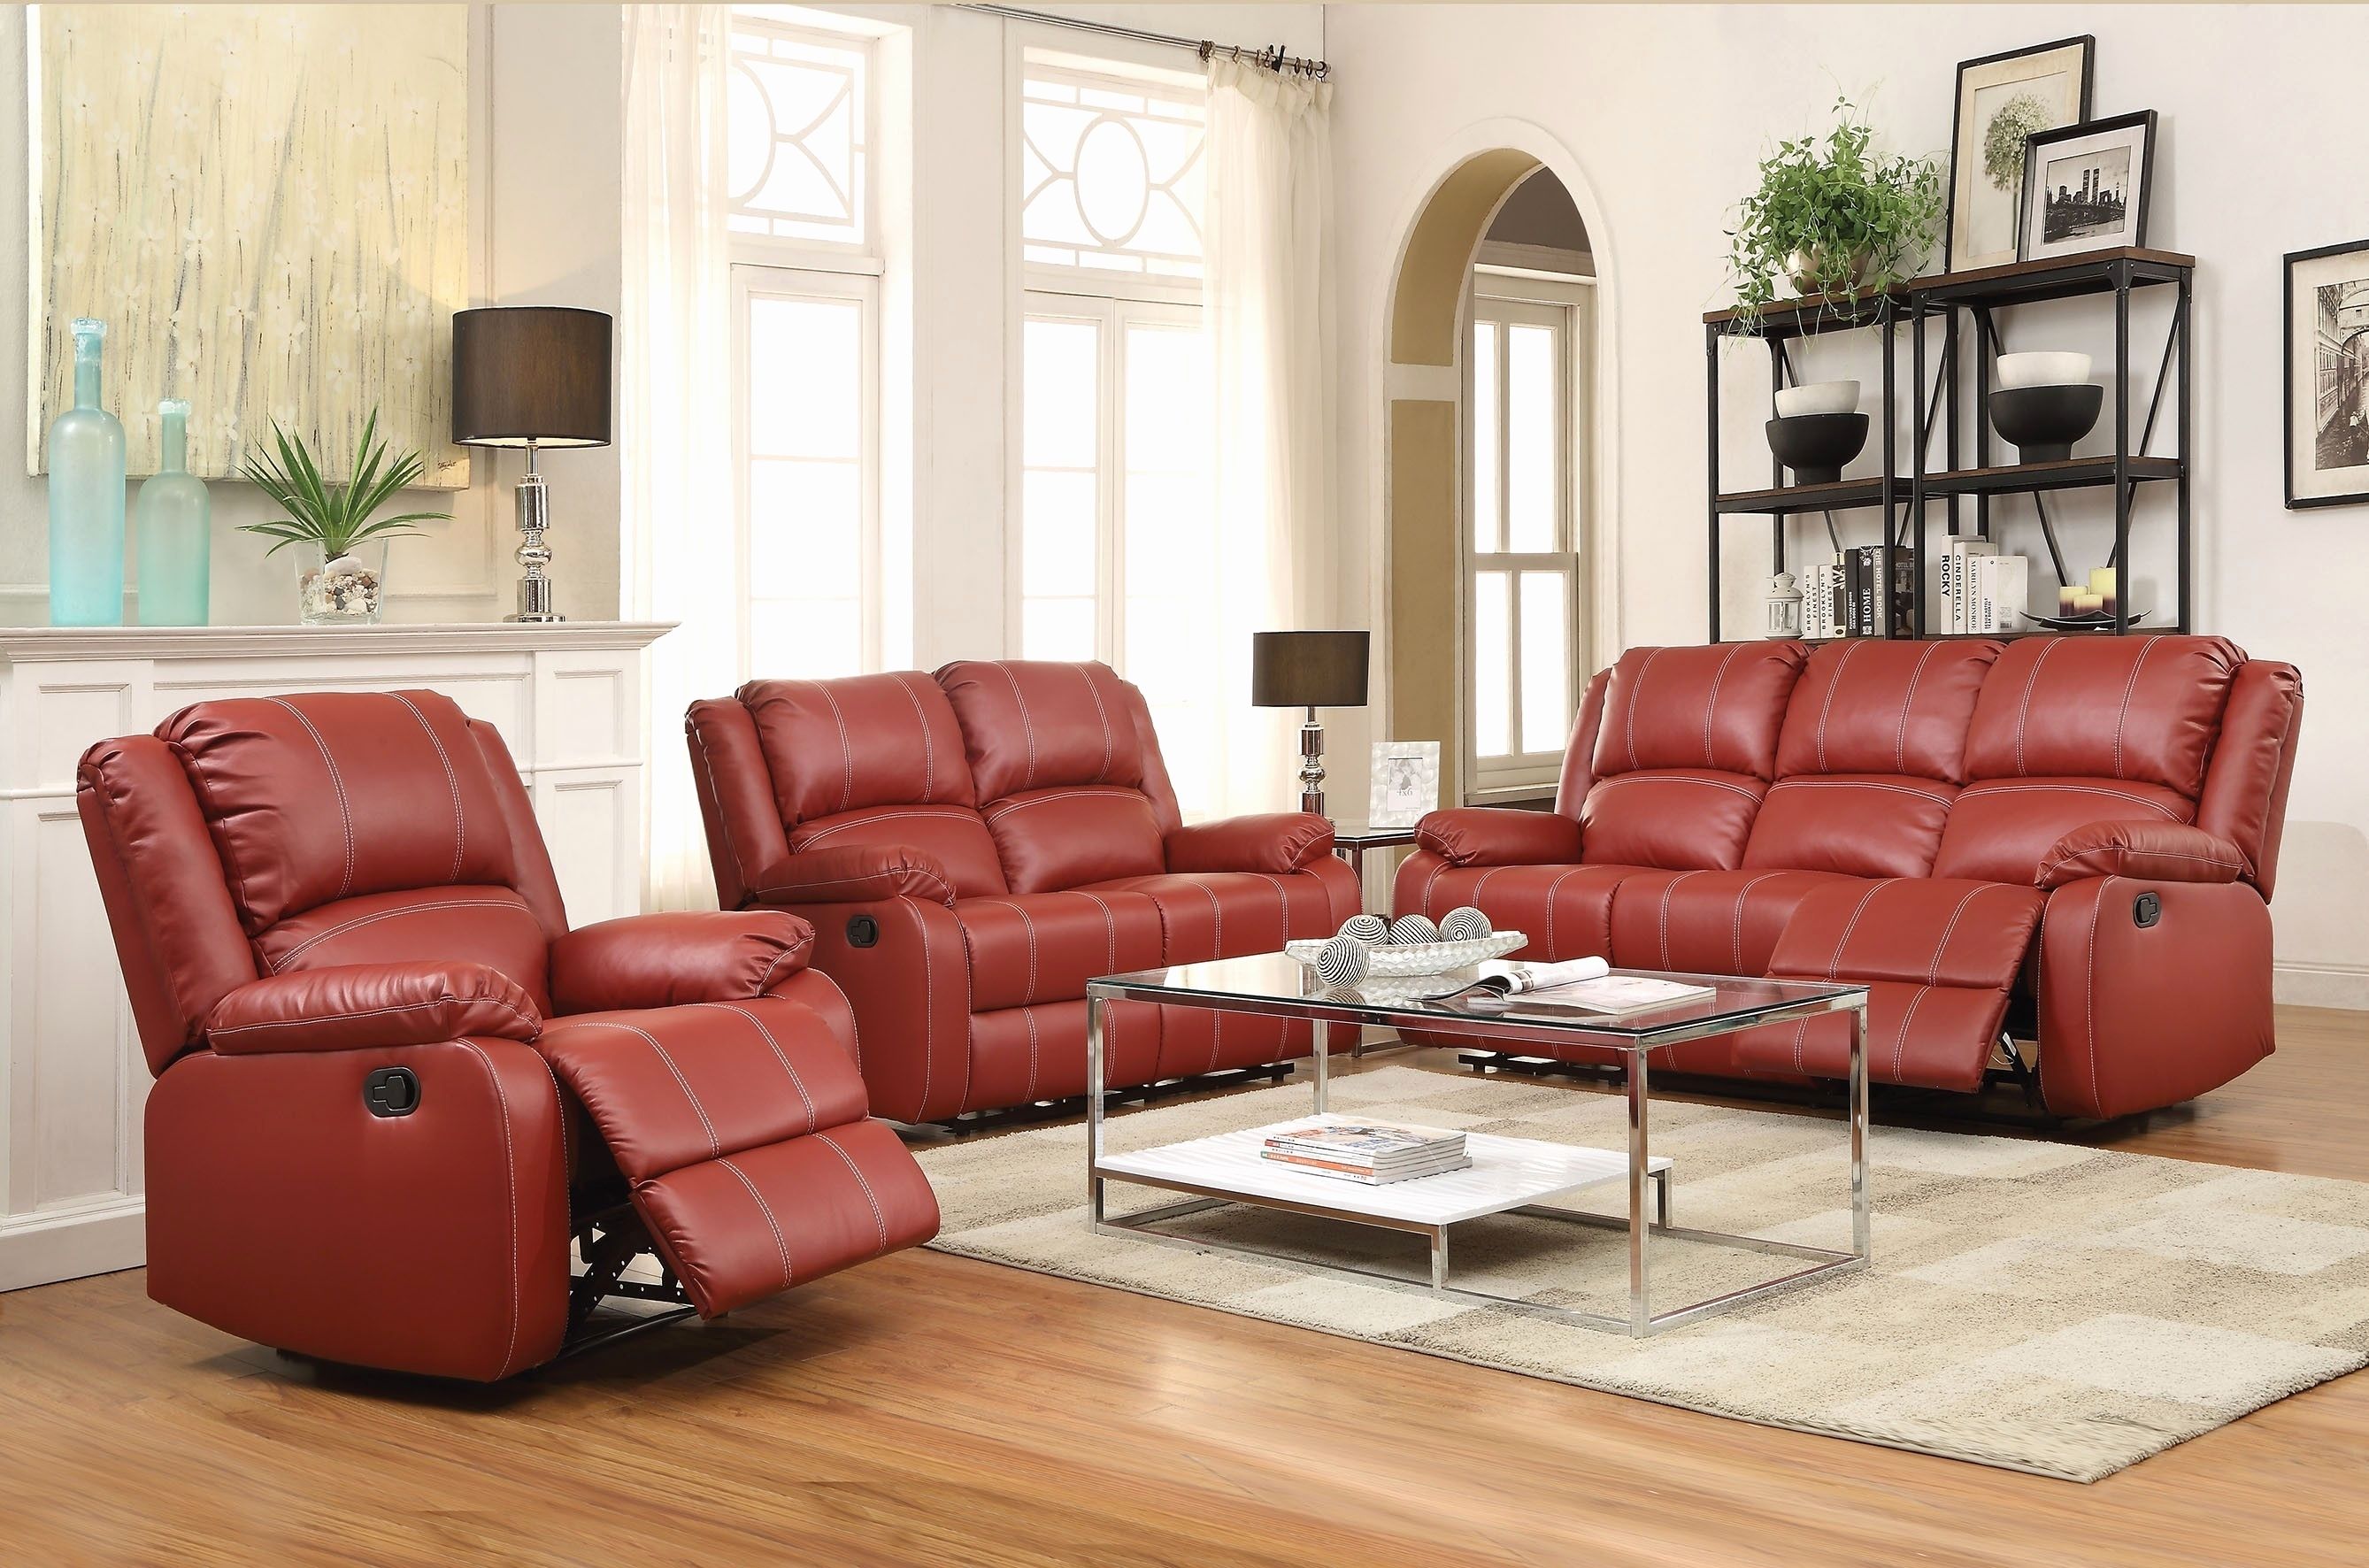 Red Leather Reclining Sofa And Loveseat | Ezhandui With Regard To Red Leather Reclining Sofas And Loveseats (View 13 of 15)